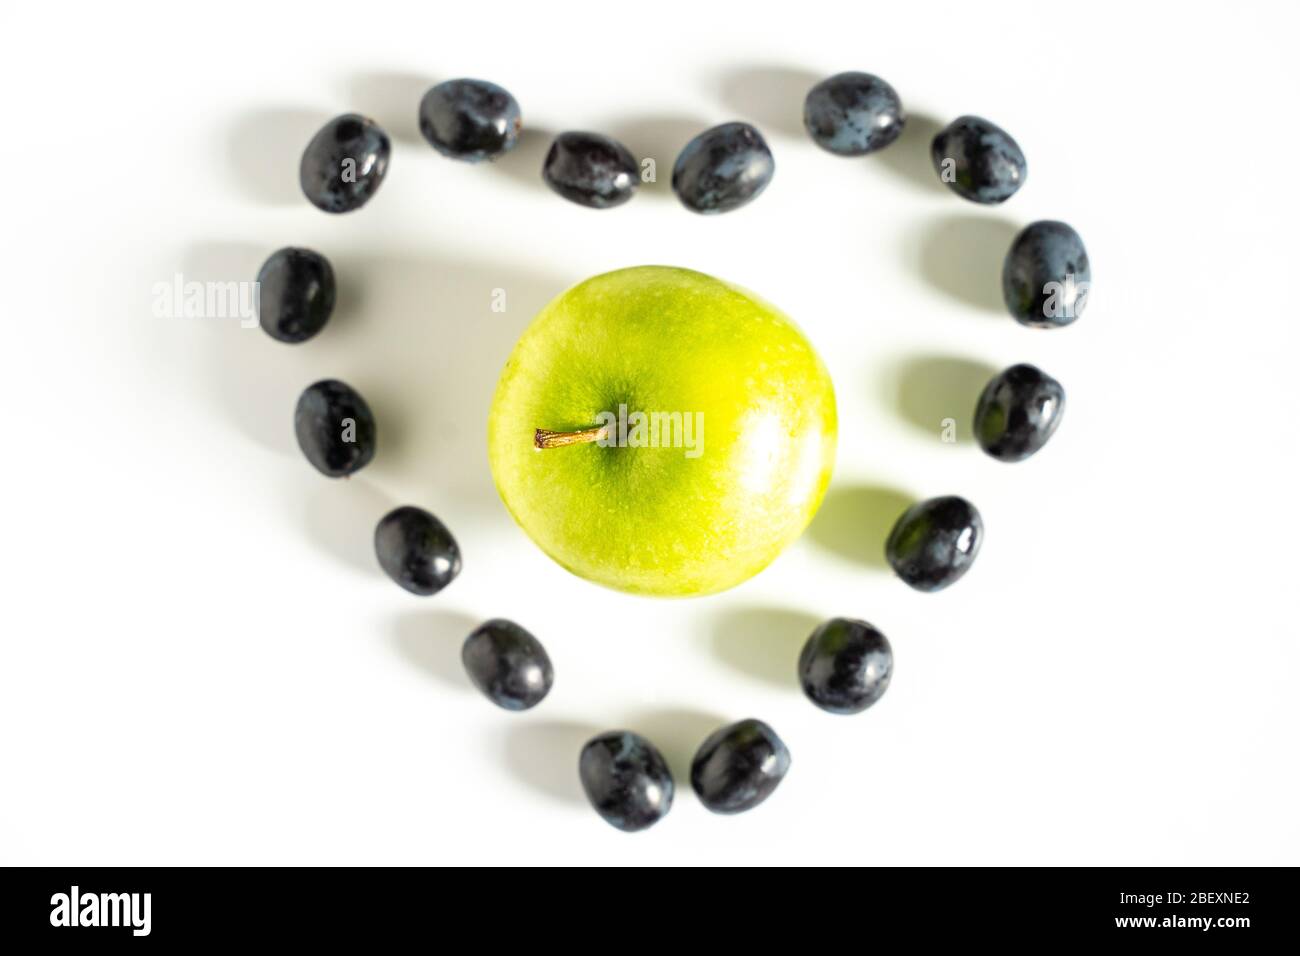 Black grapes laid out in the shape of a love heart with a granny smith apple in the center against a plain white background Stock Photo